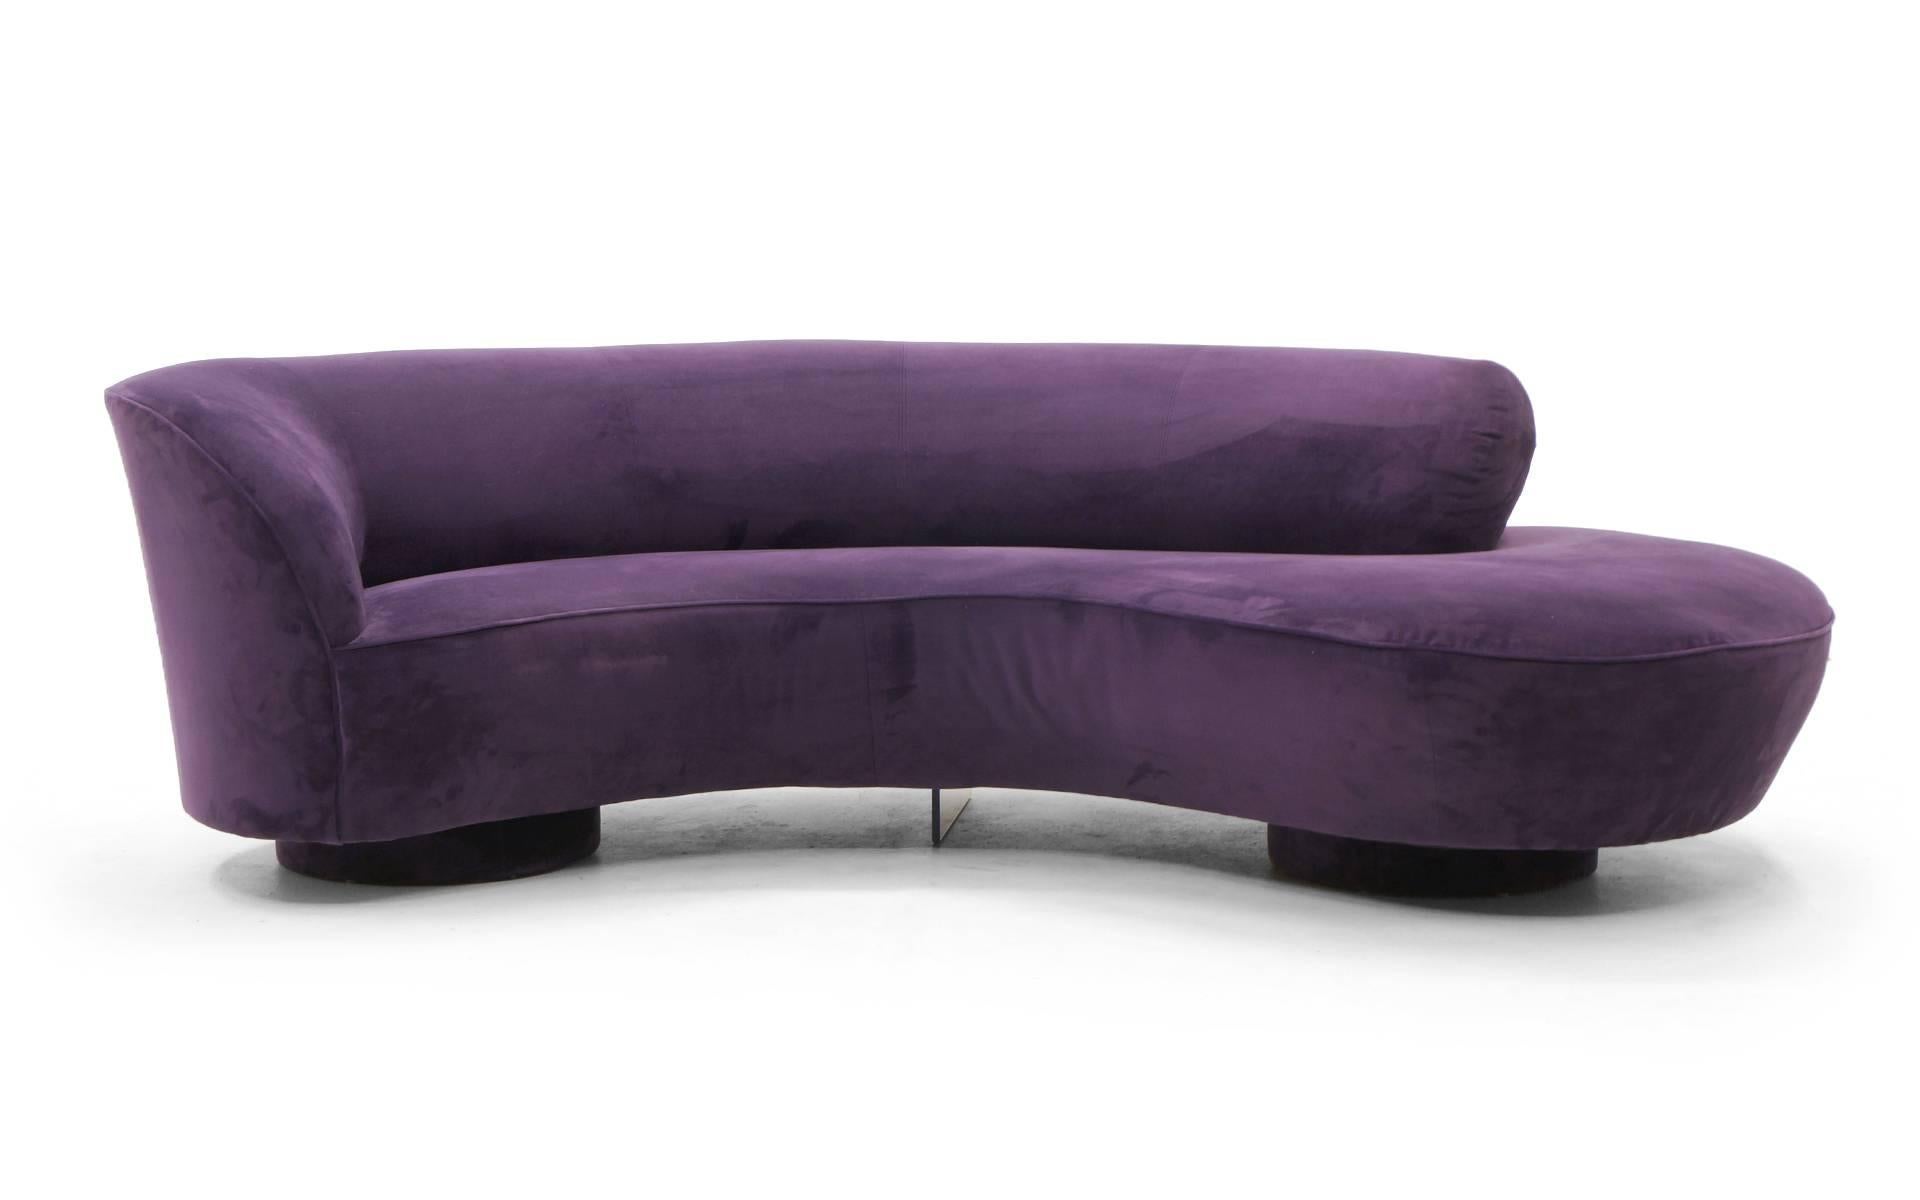 Complimenting pair of Vladimir Kagan cloud sofas. Each an iconic design. Manufactured by Directional and we have the original Directional labels that the original owners kept when they had these reupholstered a short time ago. Popular violet / plum